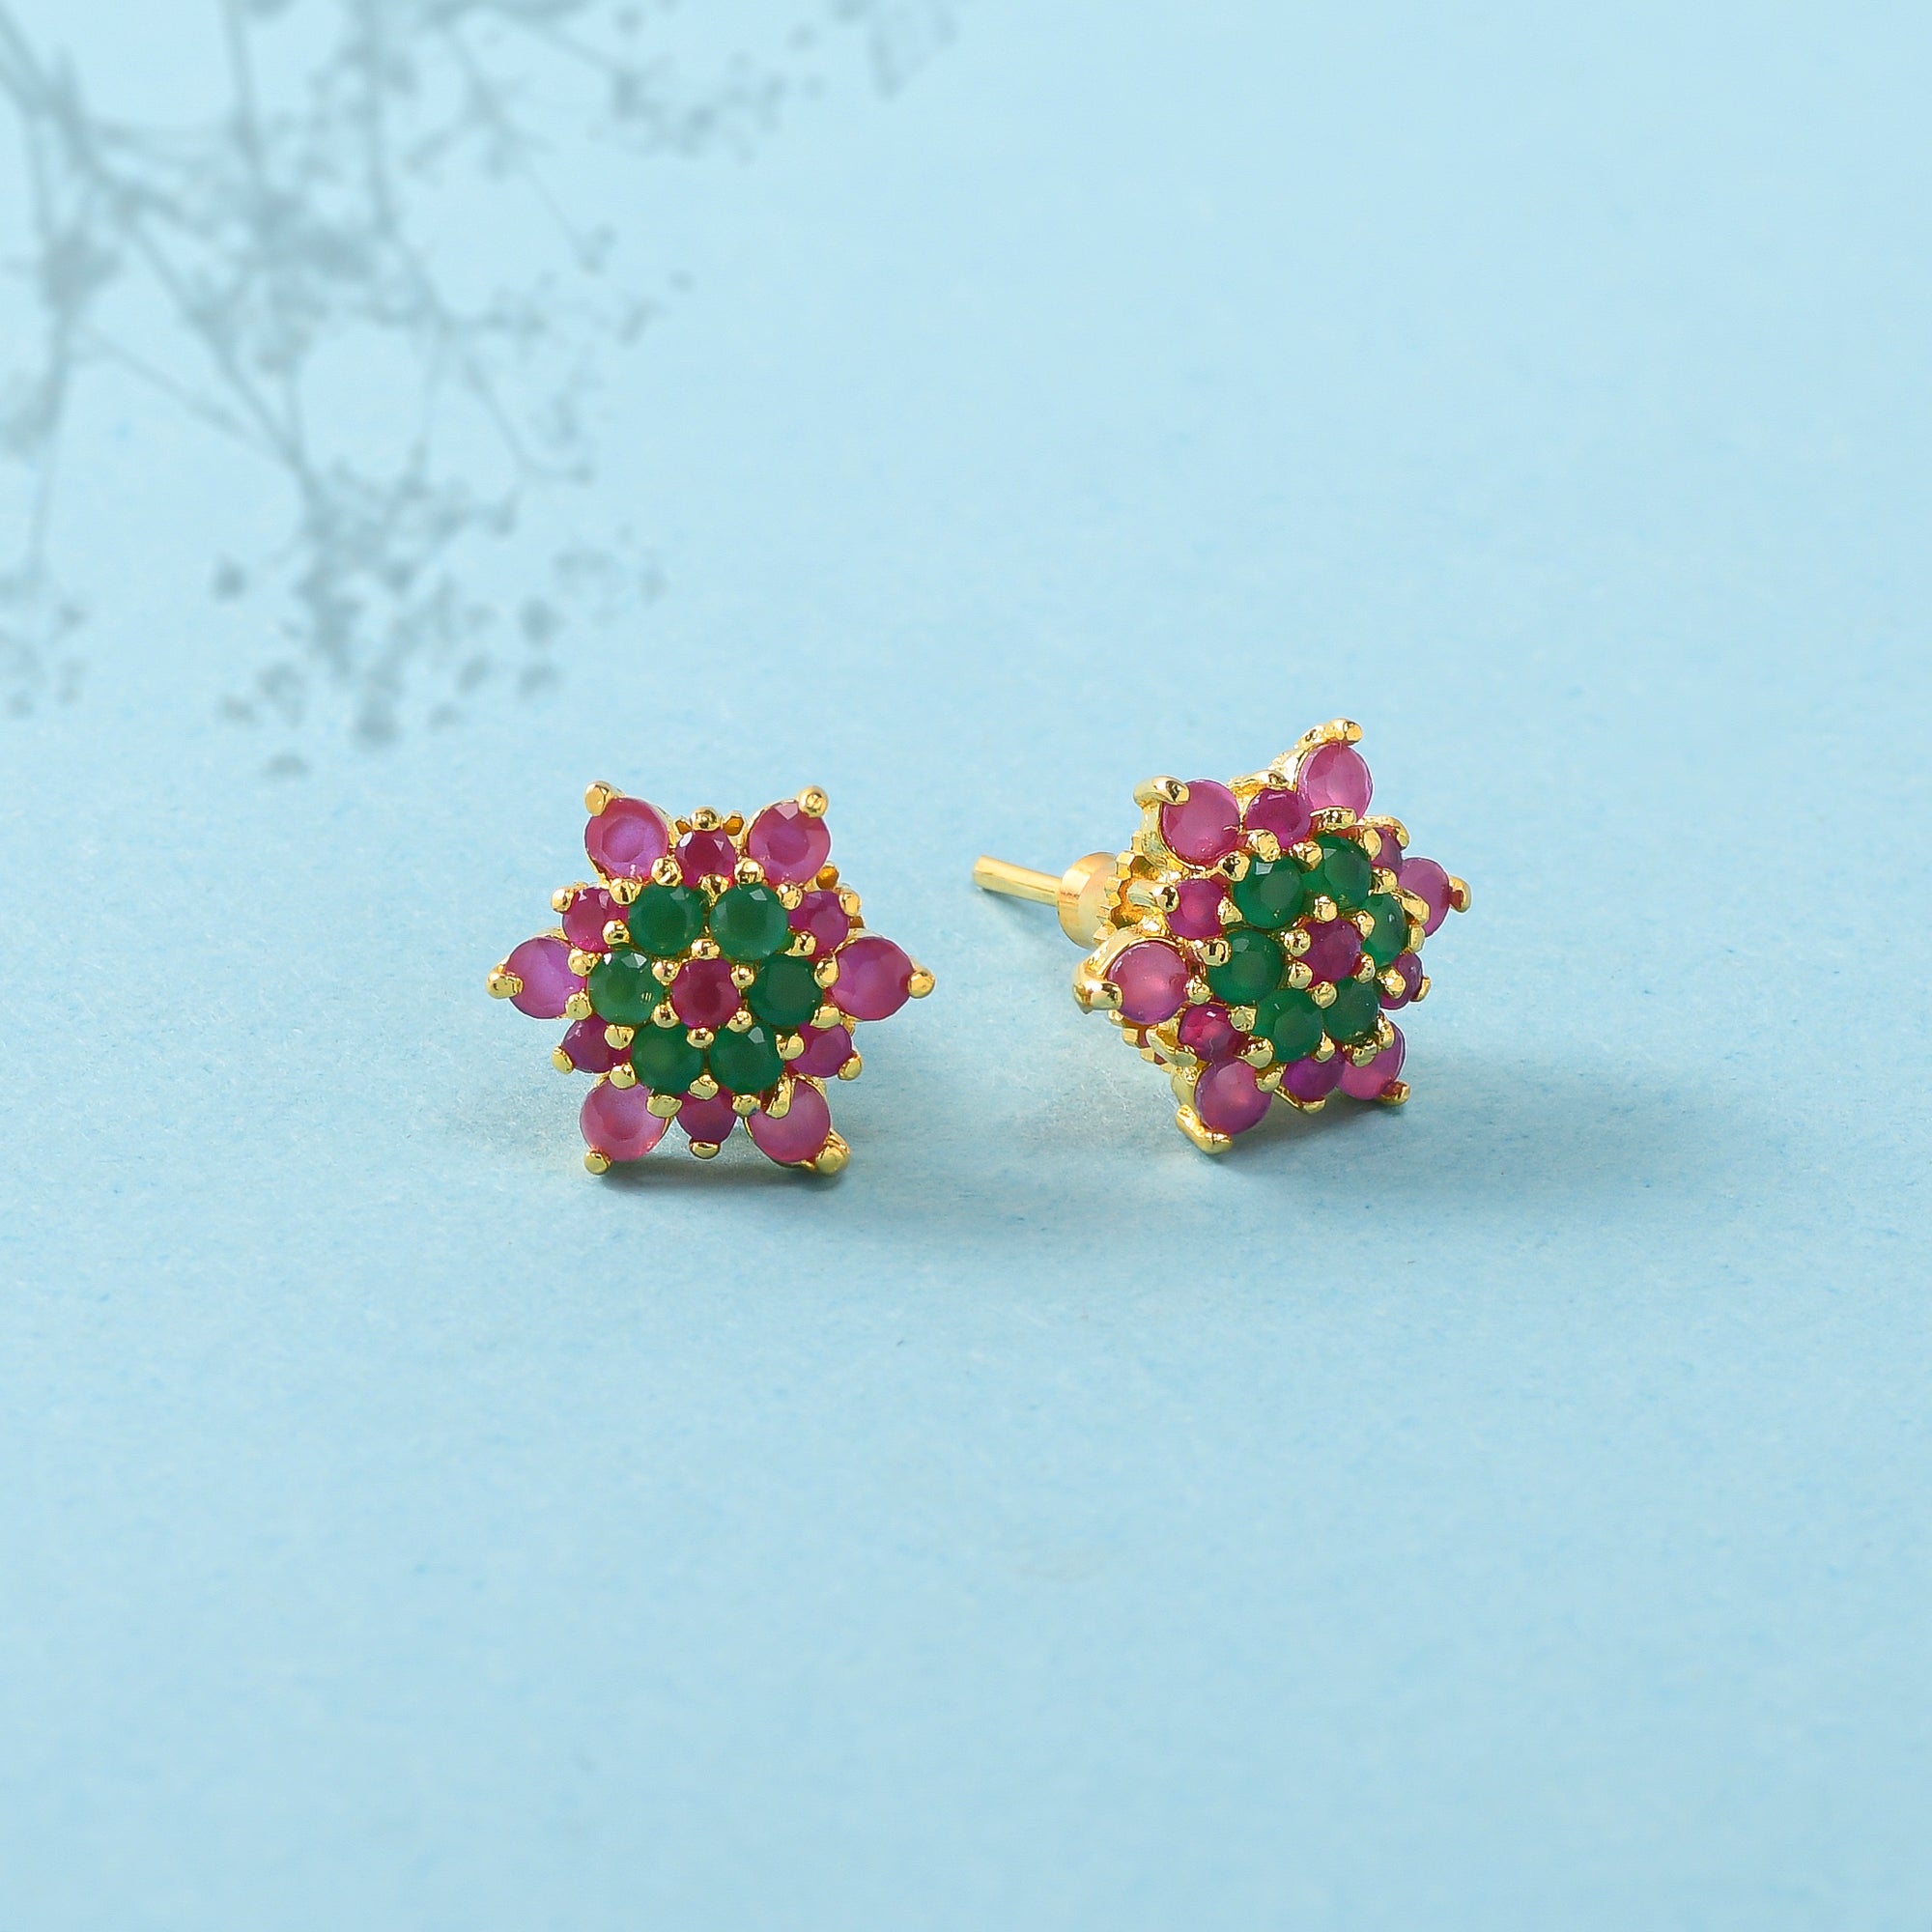 Green and Pink Round Cut CZ Stud Earrings